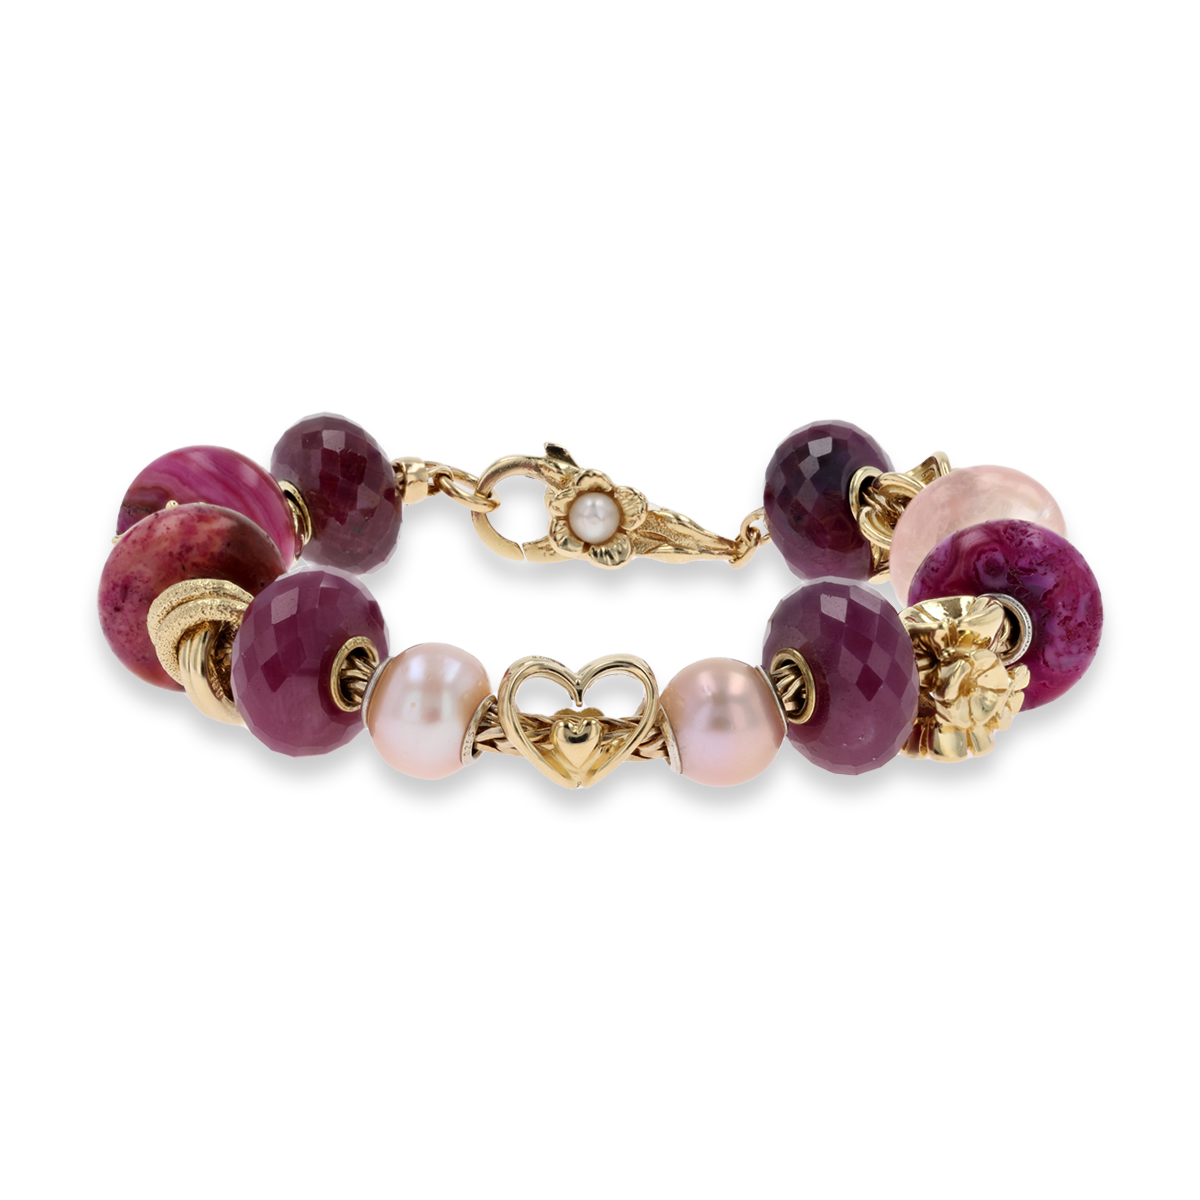 Trollbeads Exclusive 18ct Yellow Gold Heart to Heart on Inspiration Bracelet